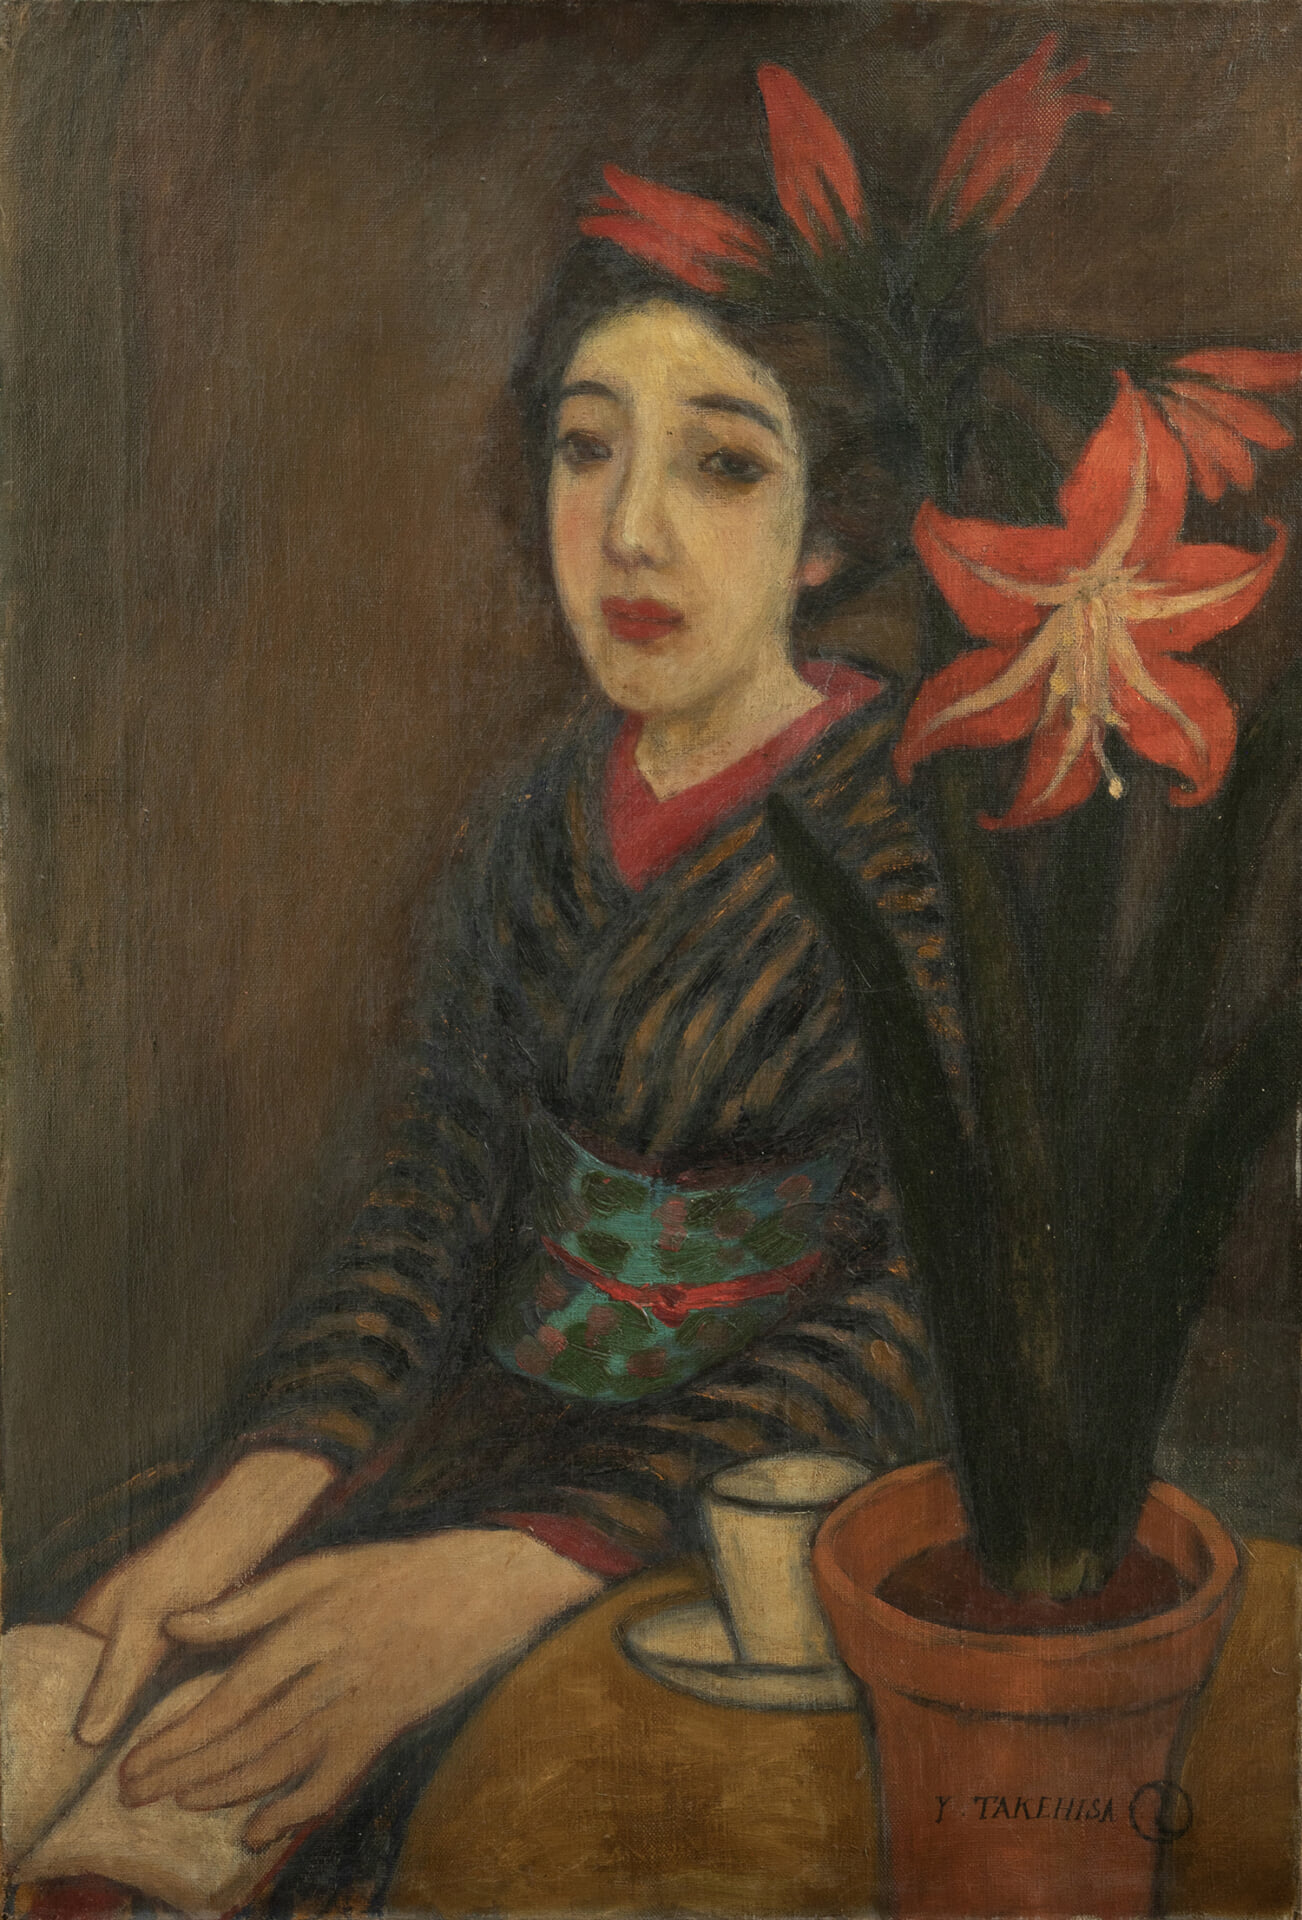 Amaryllis, about 1919, Oil on canvas, Collection of Yumeji Art Museum